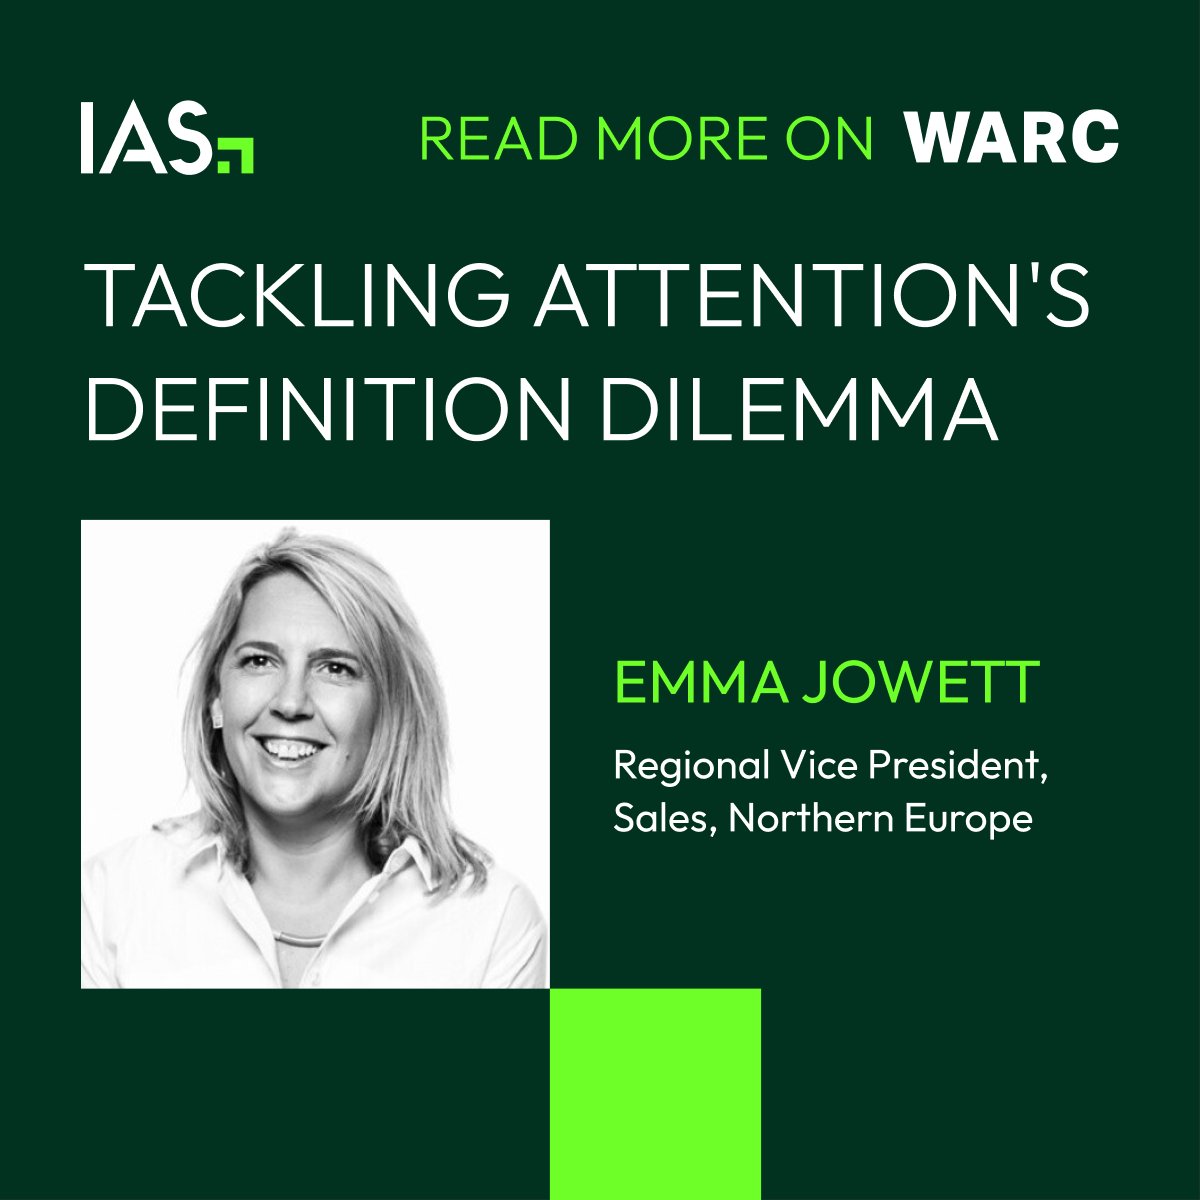 In her recent article for @WARCEditors, IAS VP Emma Jowett discusses why visibility, situation and interaction are the signals that the advertising industry must agree on to define attention: warc.com/newsandopinion…